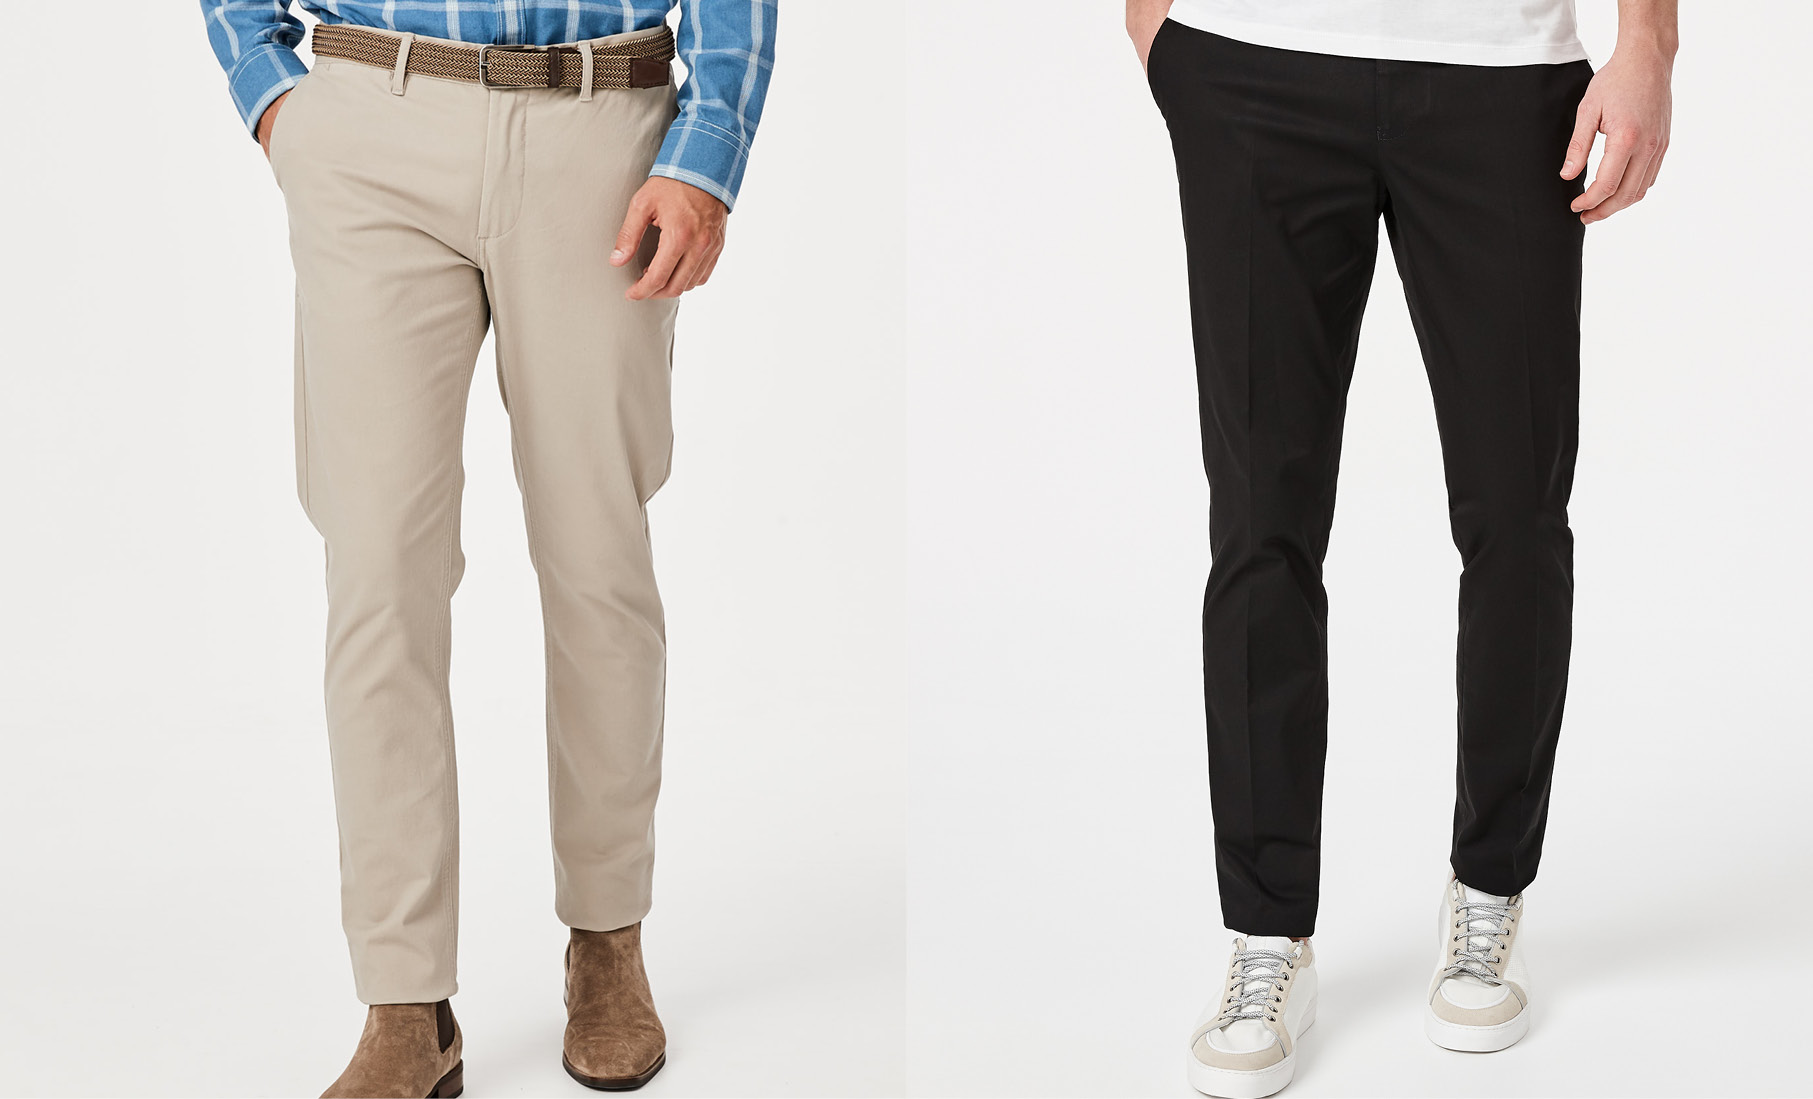 The Men’s Chino Guide For Winter | Politix